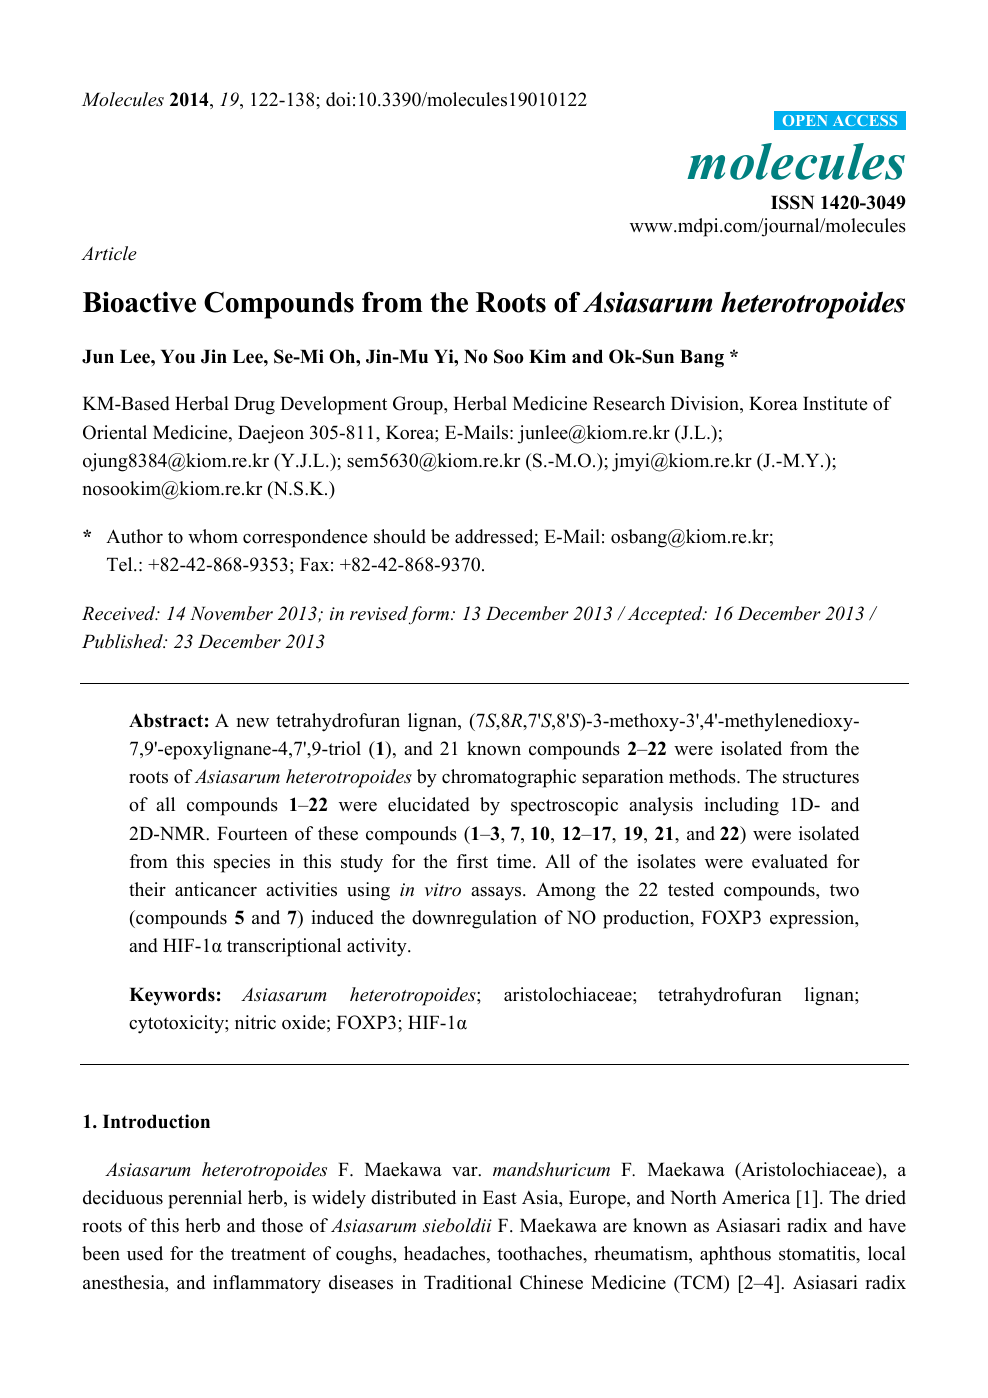 Bioactive Compounds From The Roots Of Asiasarum Heterotropoides Topic Of Research Paper In Biological Sciences Download Scholarly Article Pdf And Read For Free On Cyberleninka Open Science Hub